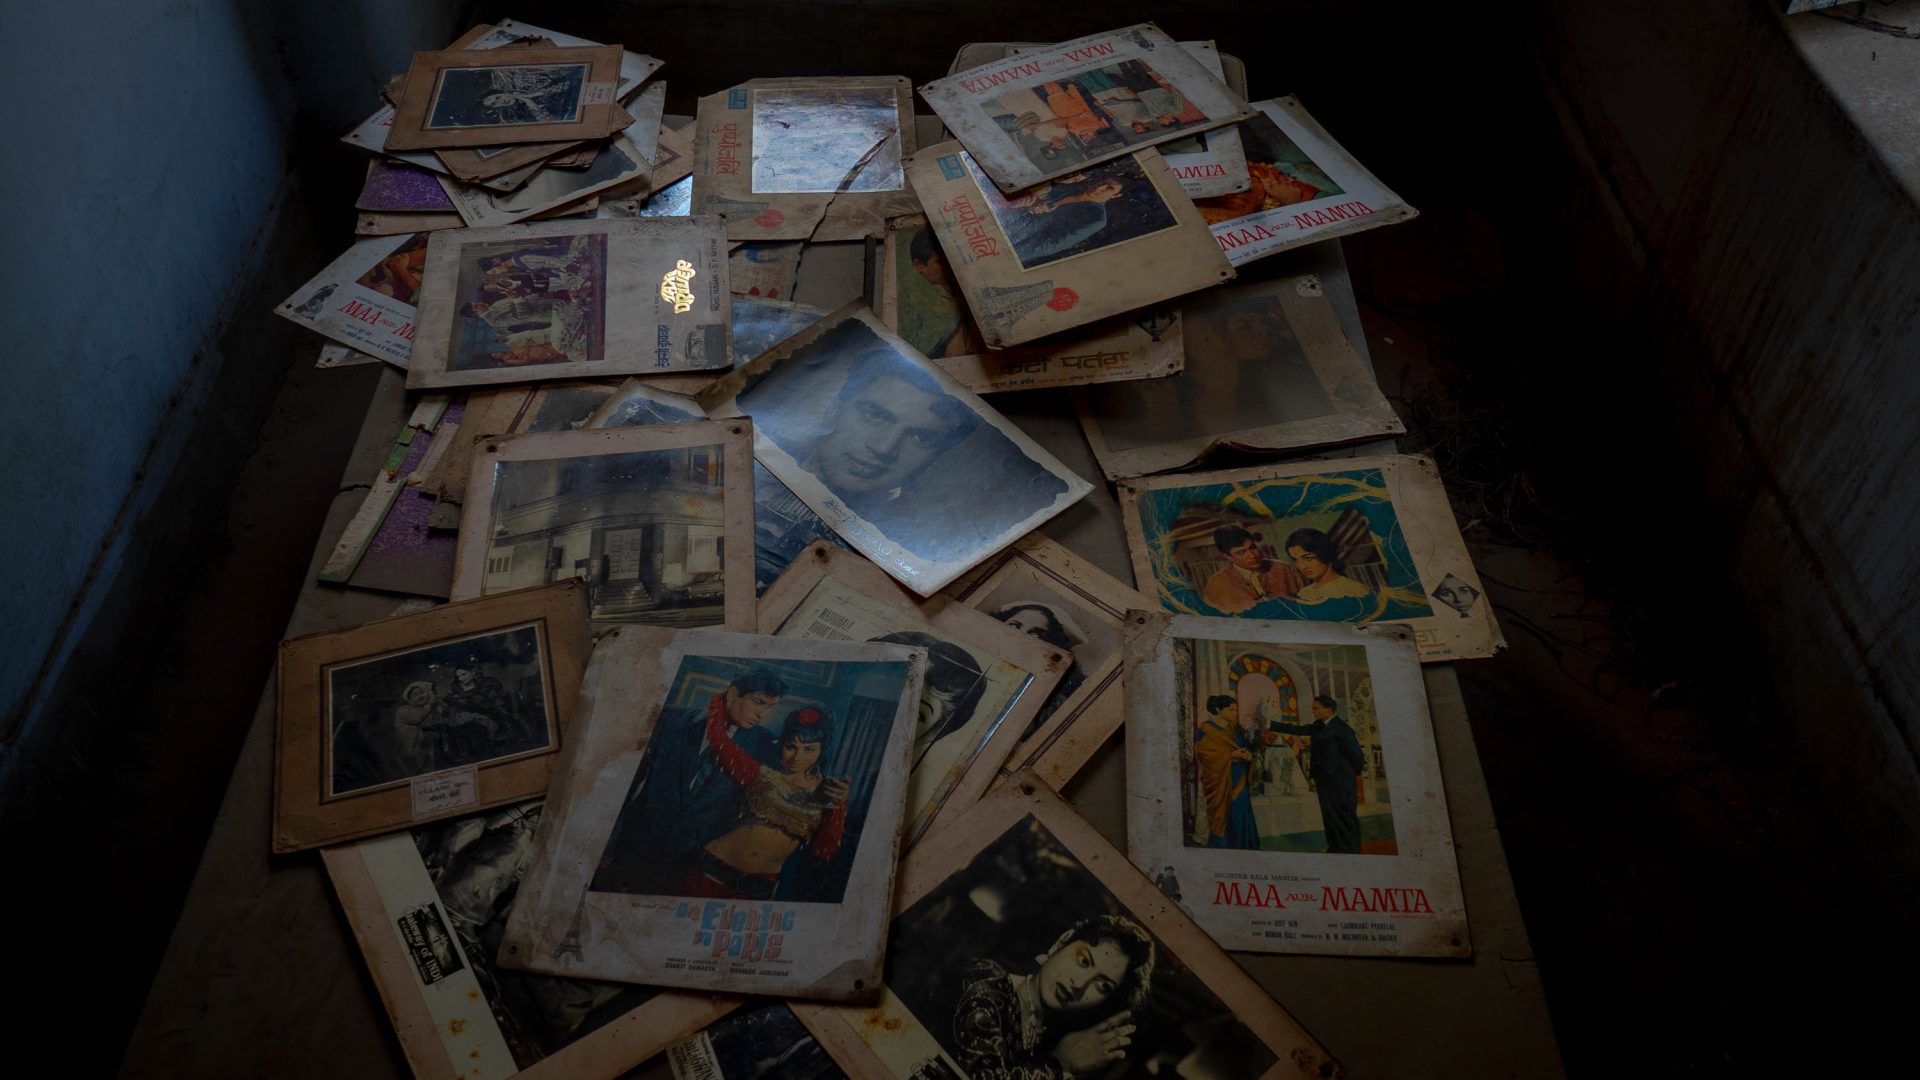 A collection of old cinema posters lies on a table.